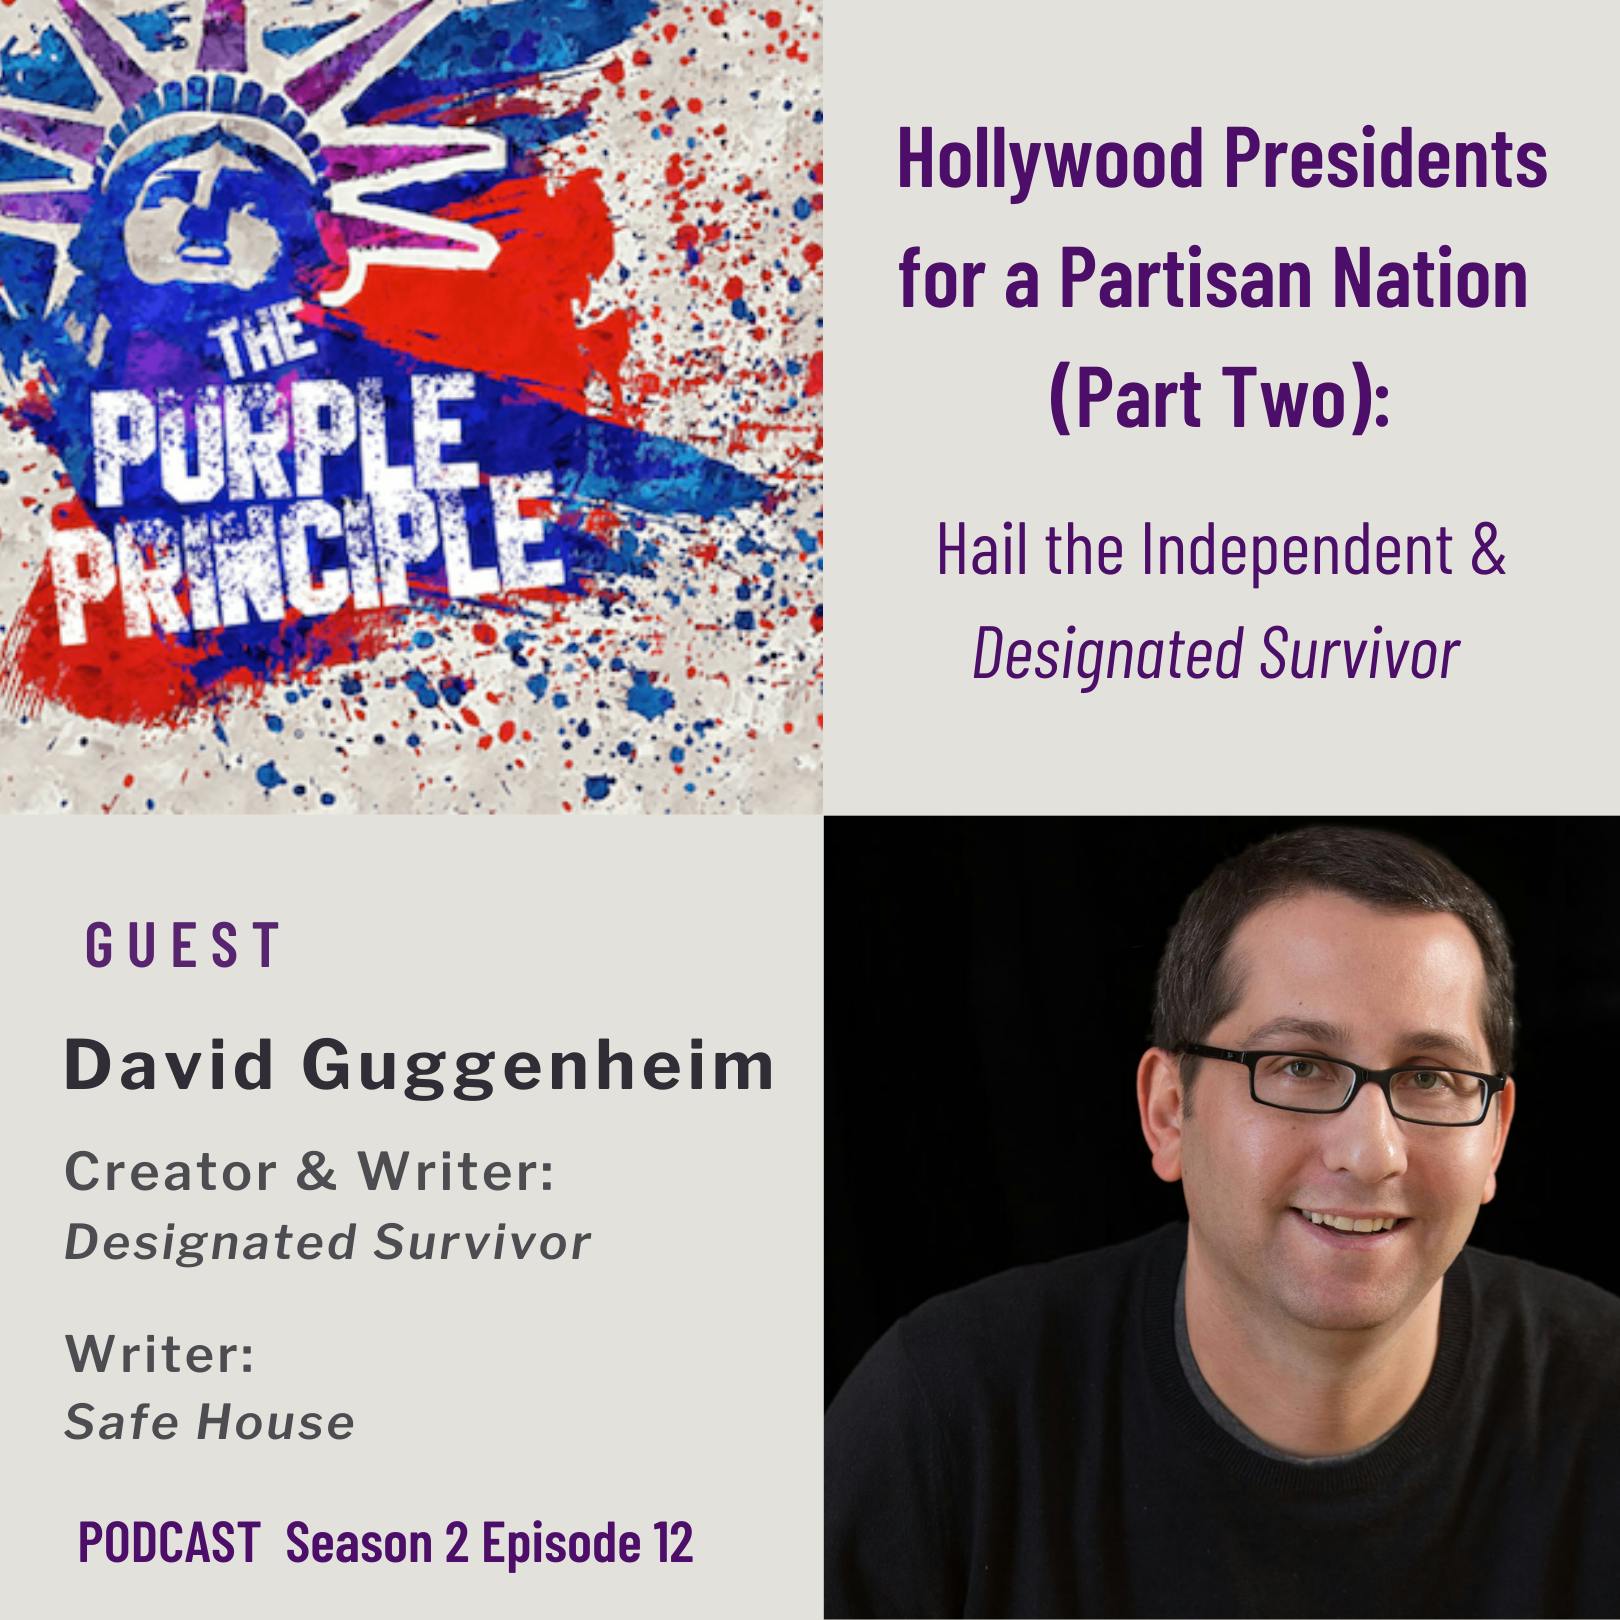 Hollywood Presidents for a Partisan Nation (Part Two): Hail the Independent & Designated Survivor